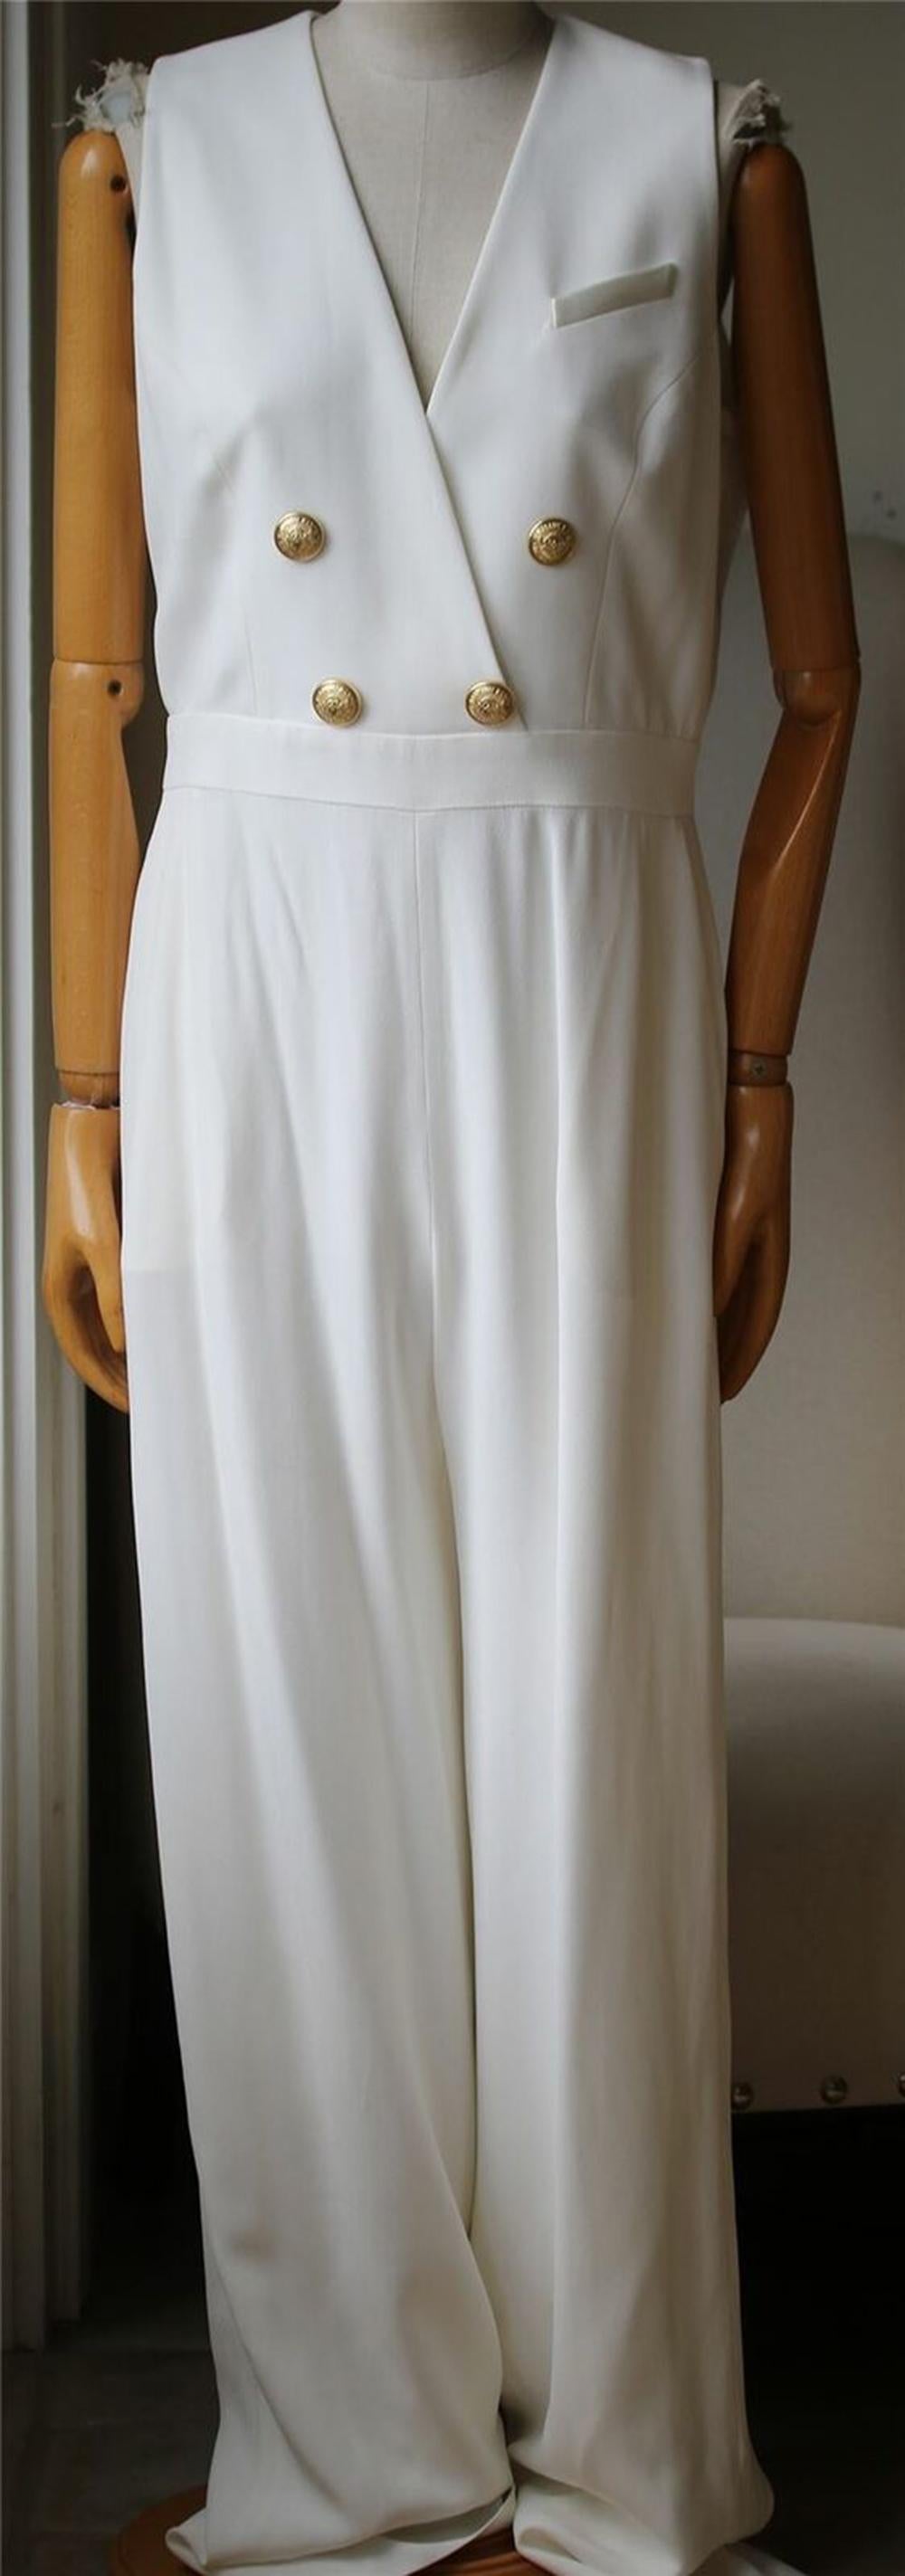 This jumpsuit suits all ladies, with its fluid white crepe silhouette, plunging neckline and signature lion-embossed buttons. White crepe. Zip fastening along back. 52% viscose, 48% acetate. Comes up small.

Size: FR 44 (UK 16, US 12, IT